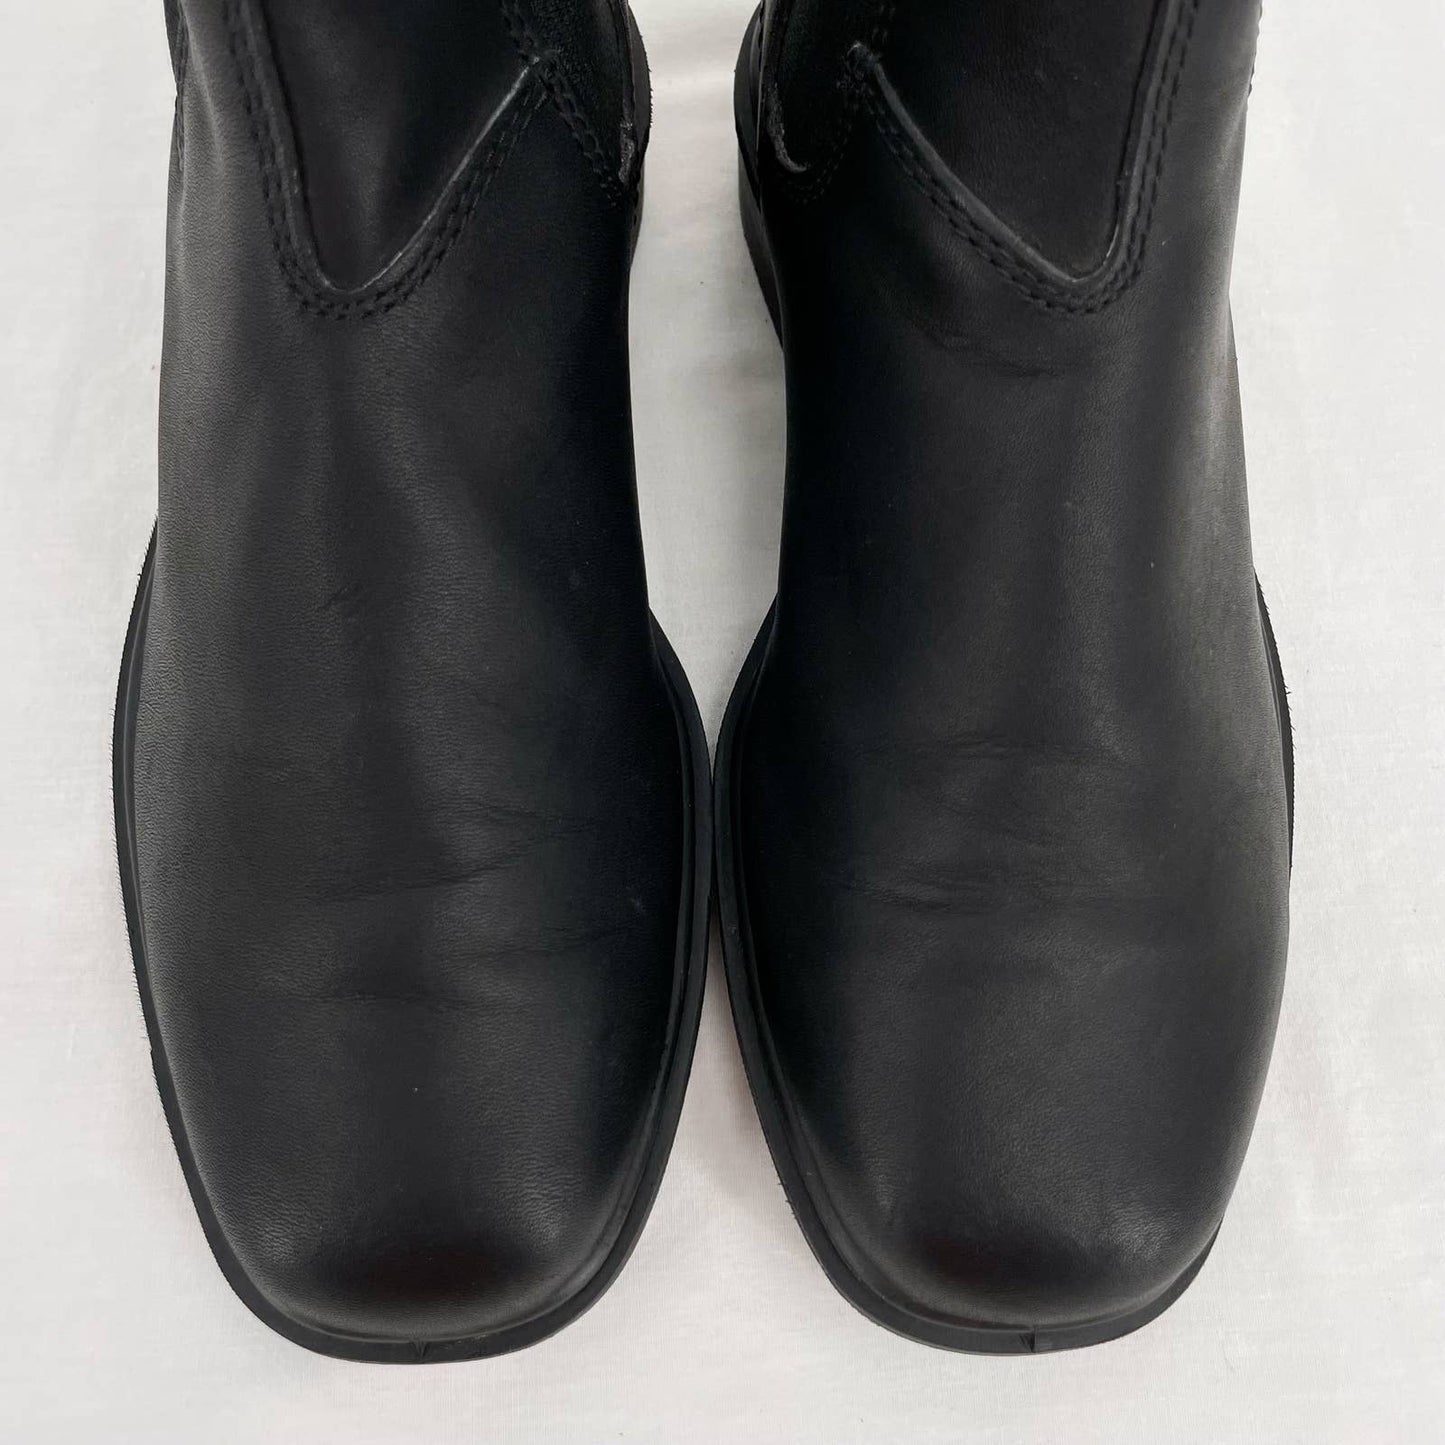 Blundstone Black Dress Boots Smooth Leather Square Toe Chelsea Style #063 Sz 5.5